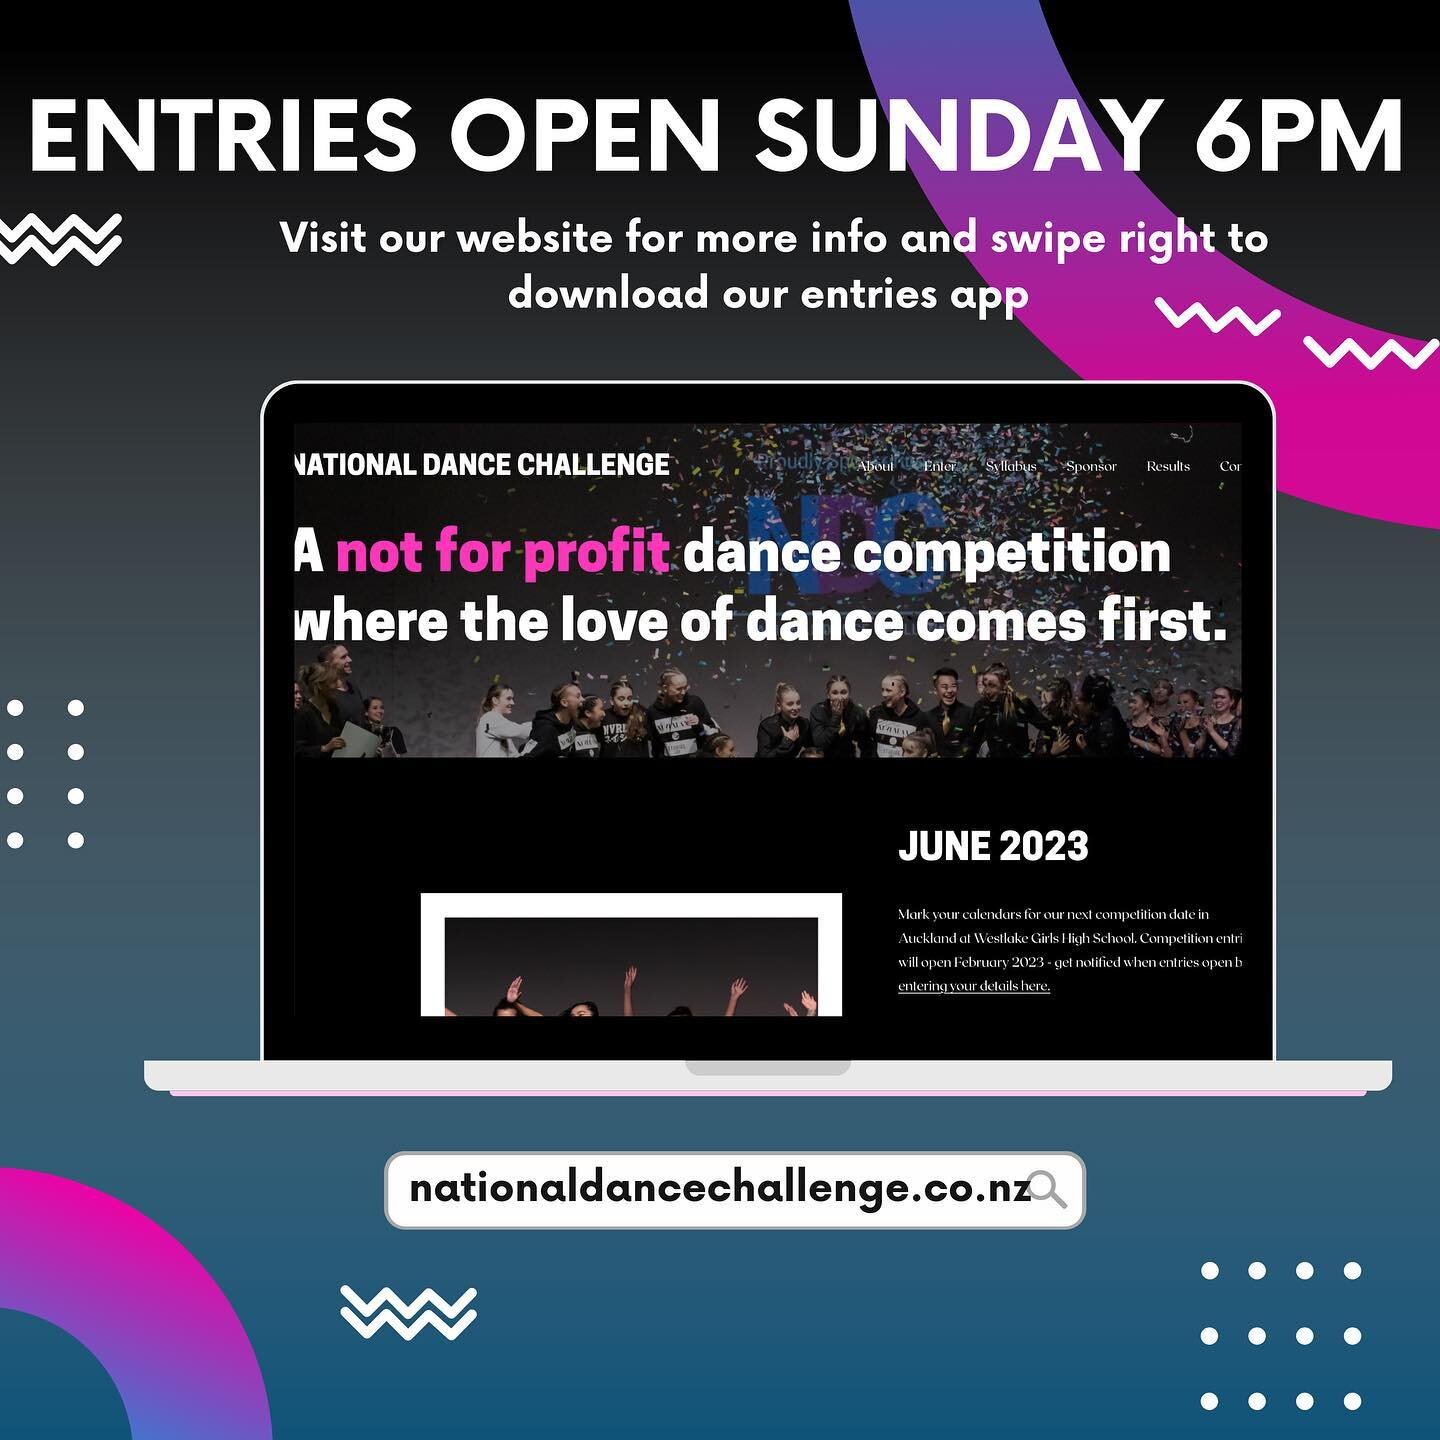 Are you ready??? Get the app, get sorted and GET READY! For the biggest troupe comp of Aotearoa &amp; now with senior solo awards we are so excited to party with all of you! ⭐️💕